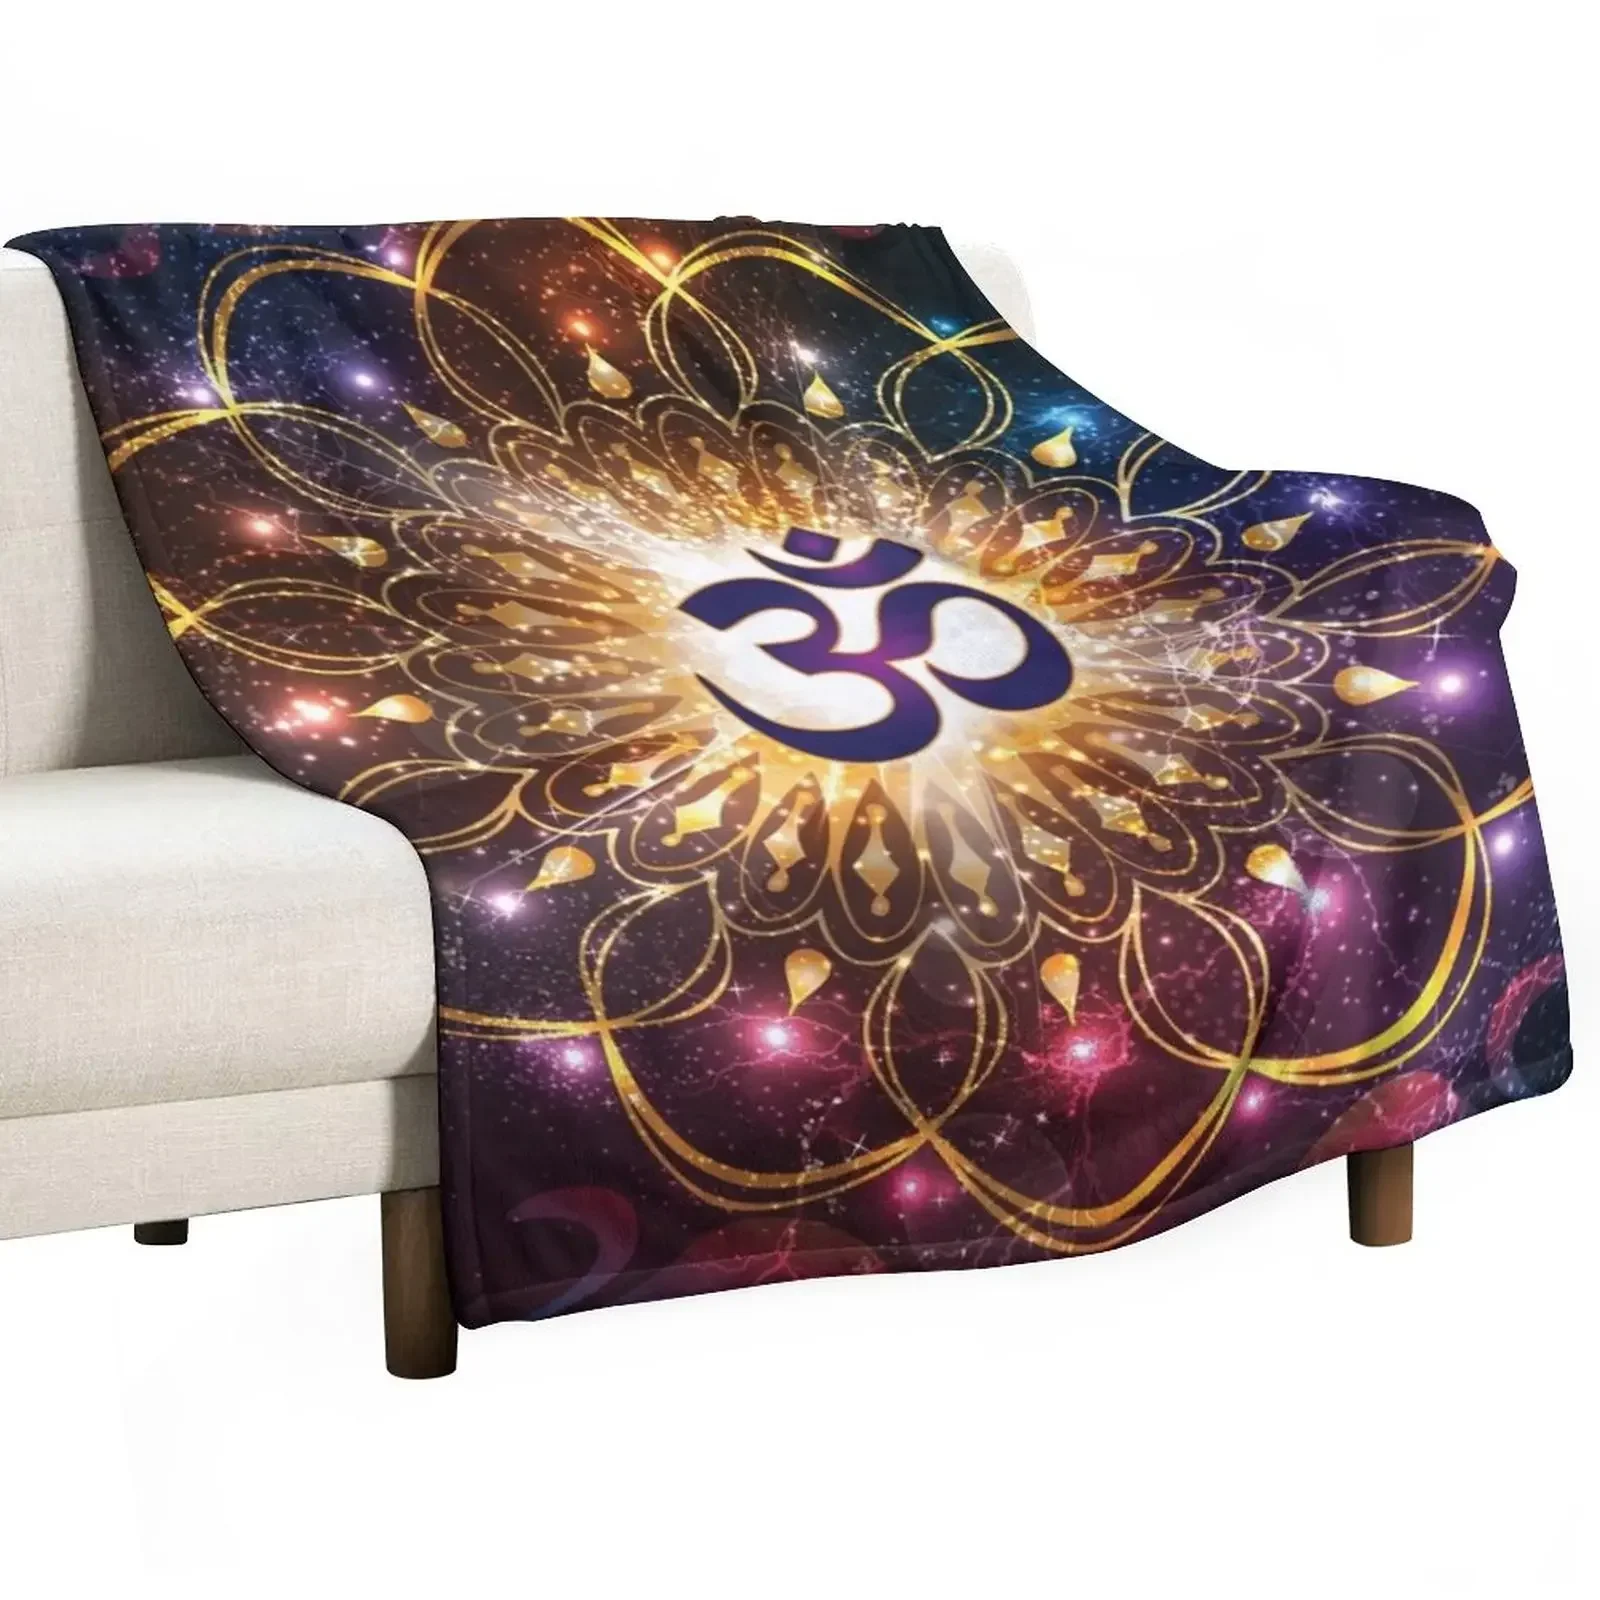 

The higher power of Om - sacred geometry Throw Blanket wednesday blankets ands blankets and throws Luxury St Blankets